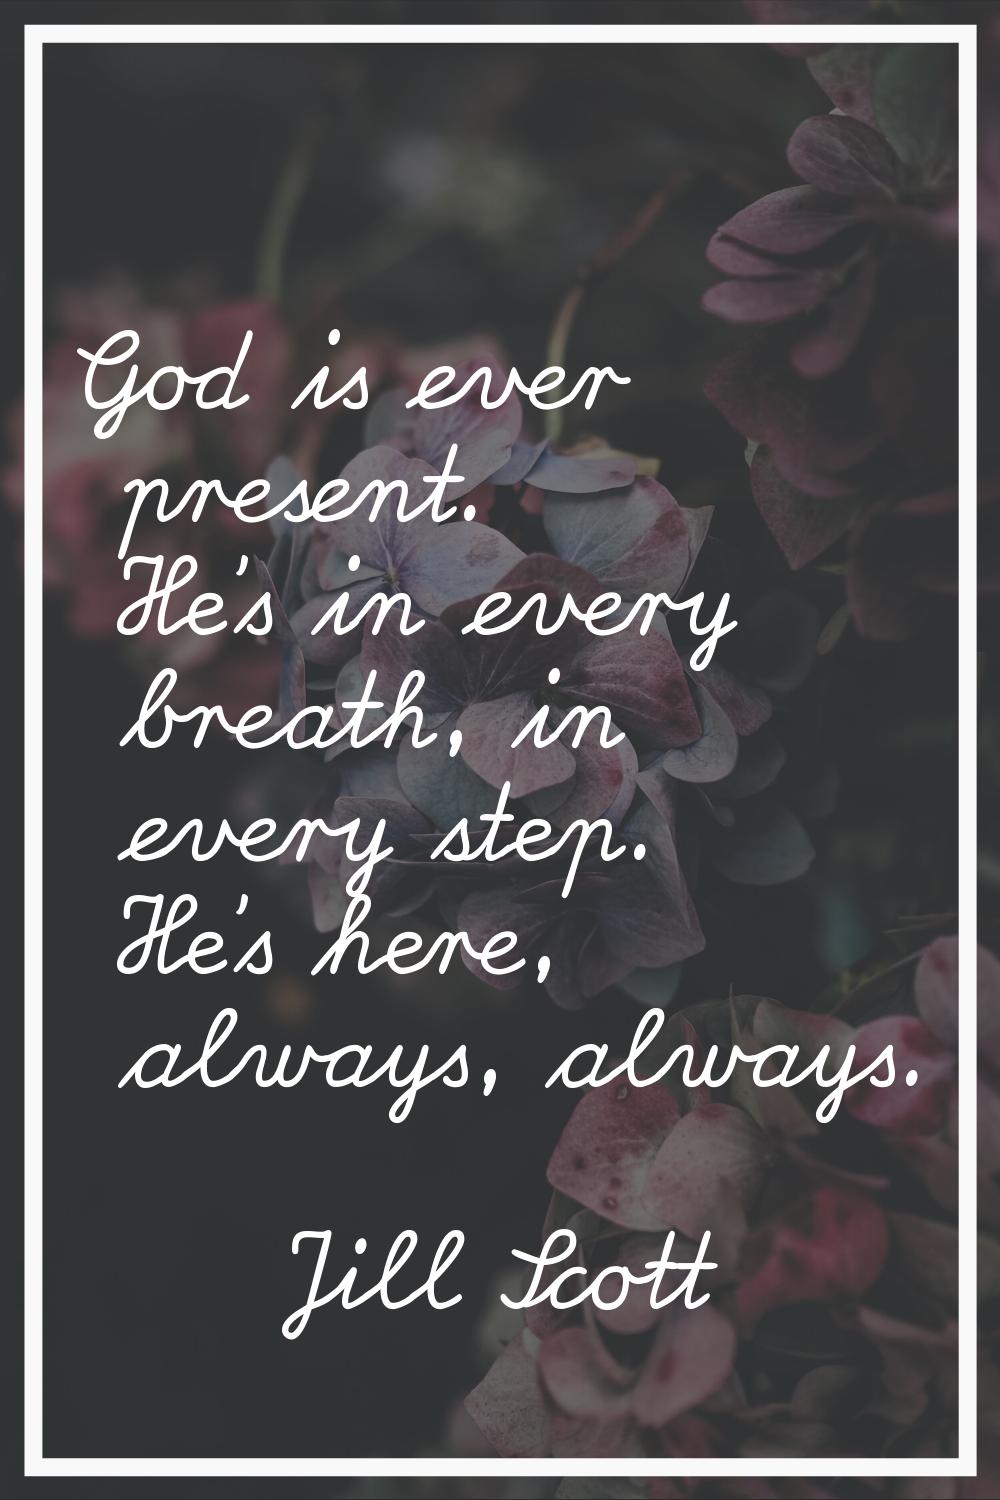 God is ever present. He's in every breath, in every step. He's here, always, always.